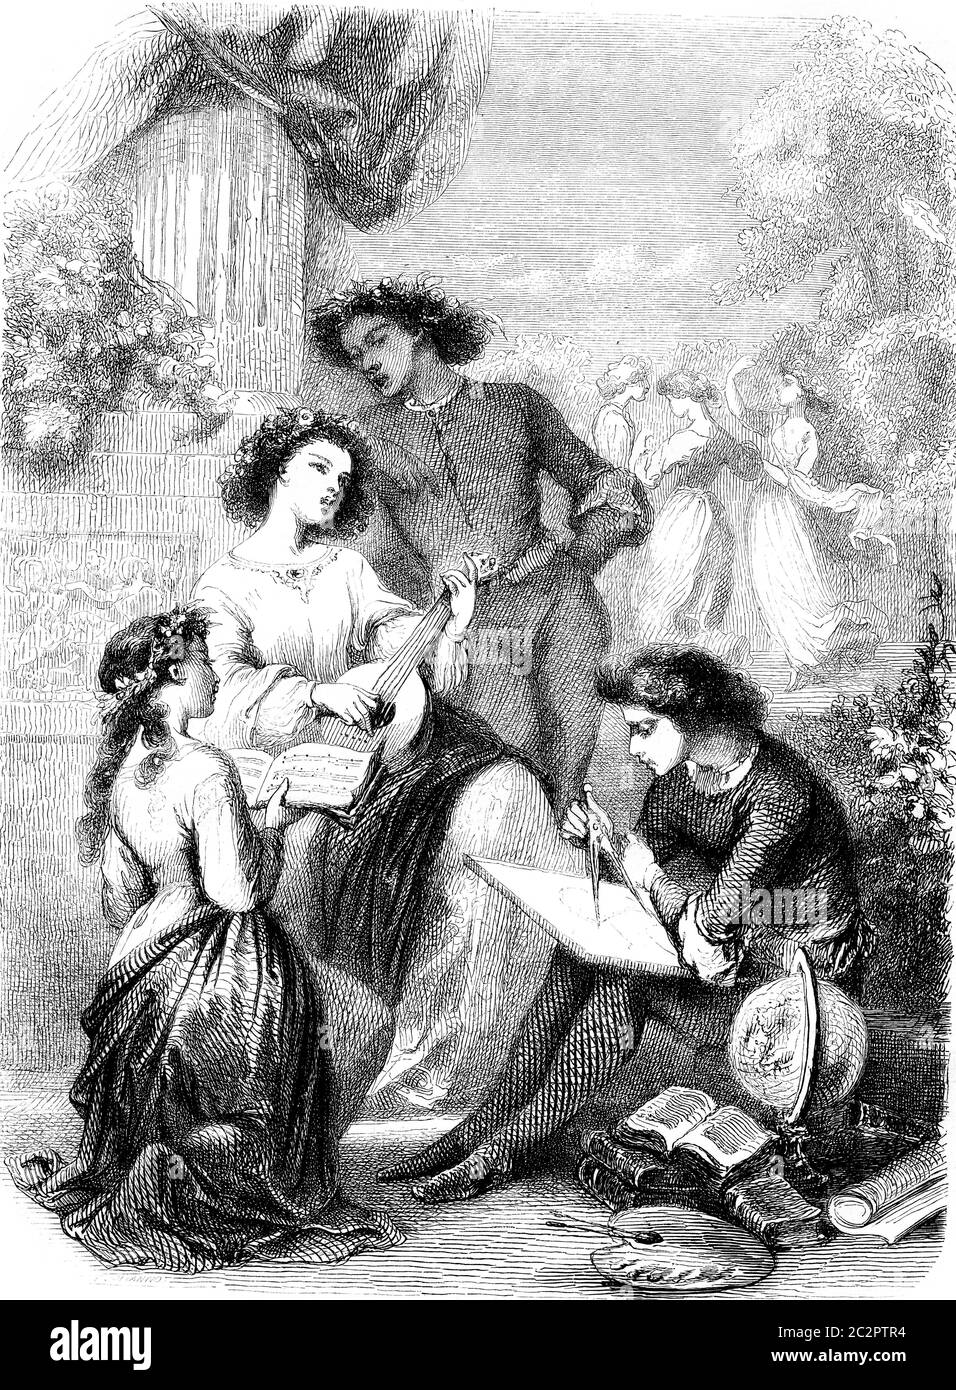 Composition and design of Tony Johannot, vintage engraved illustration. Magasin Pittoresque 1852. Stock Photo